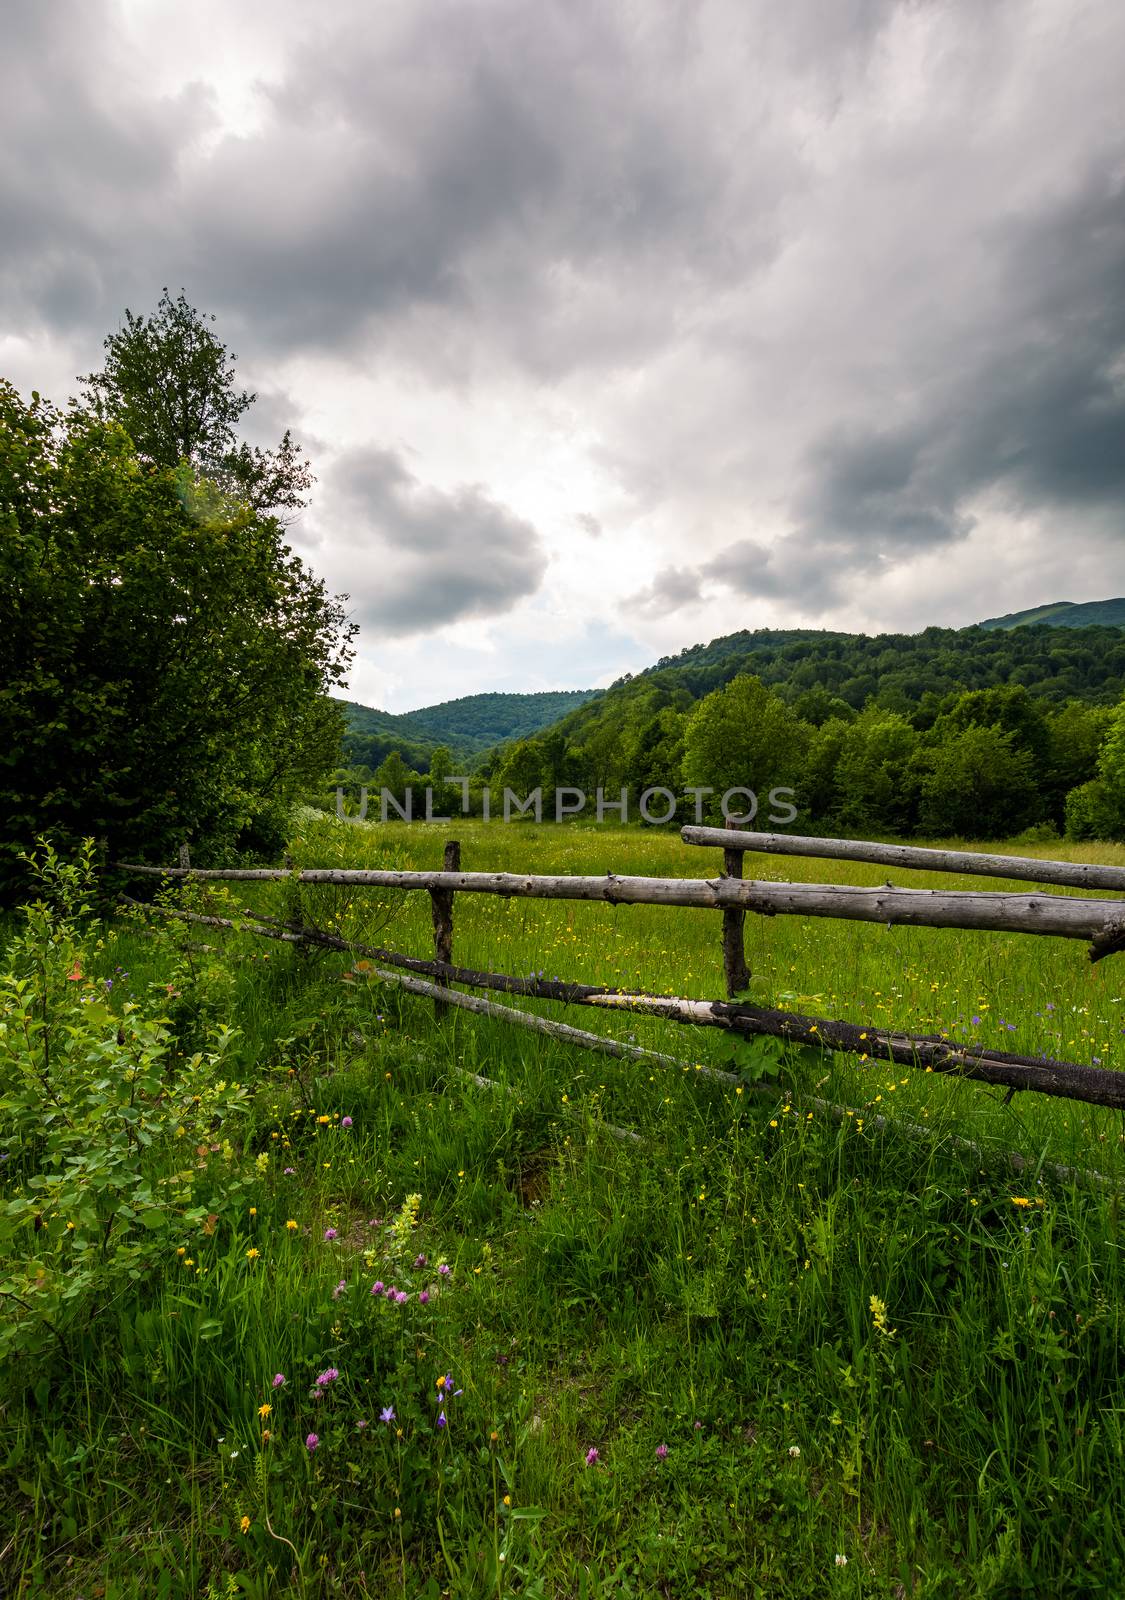 wooden fence on a rural meadow in mountains by Pellinni